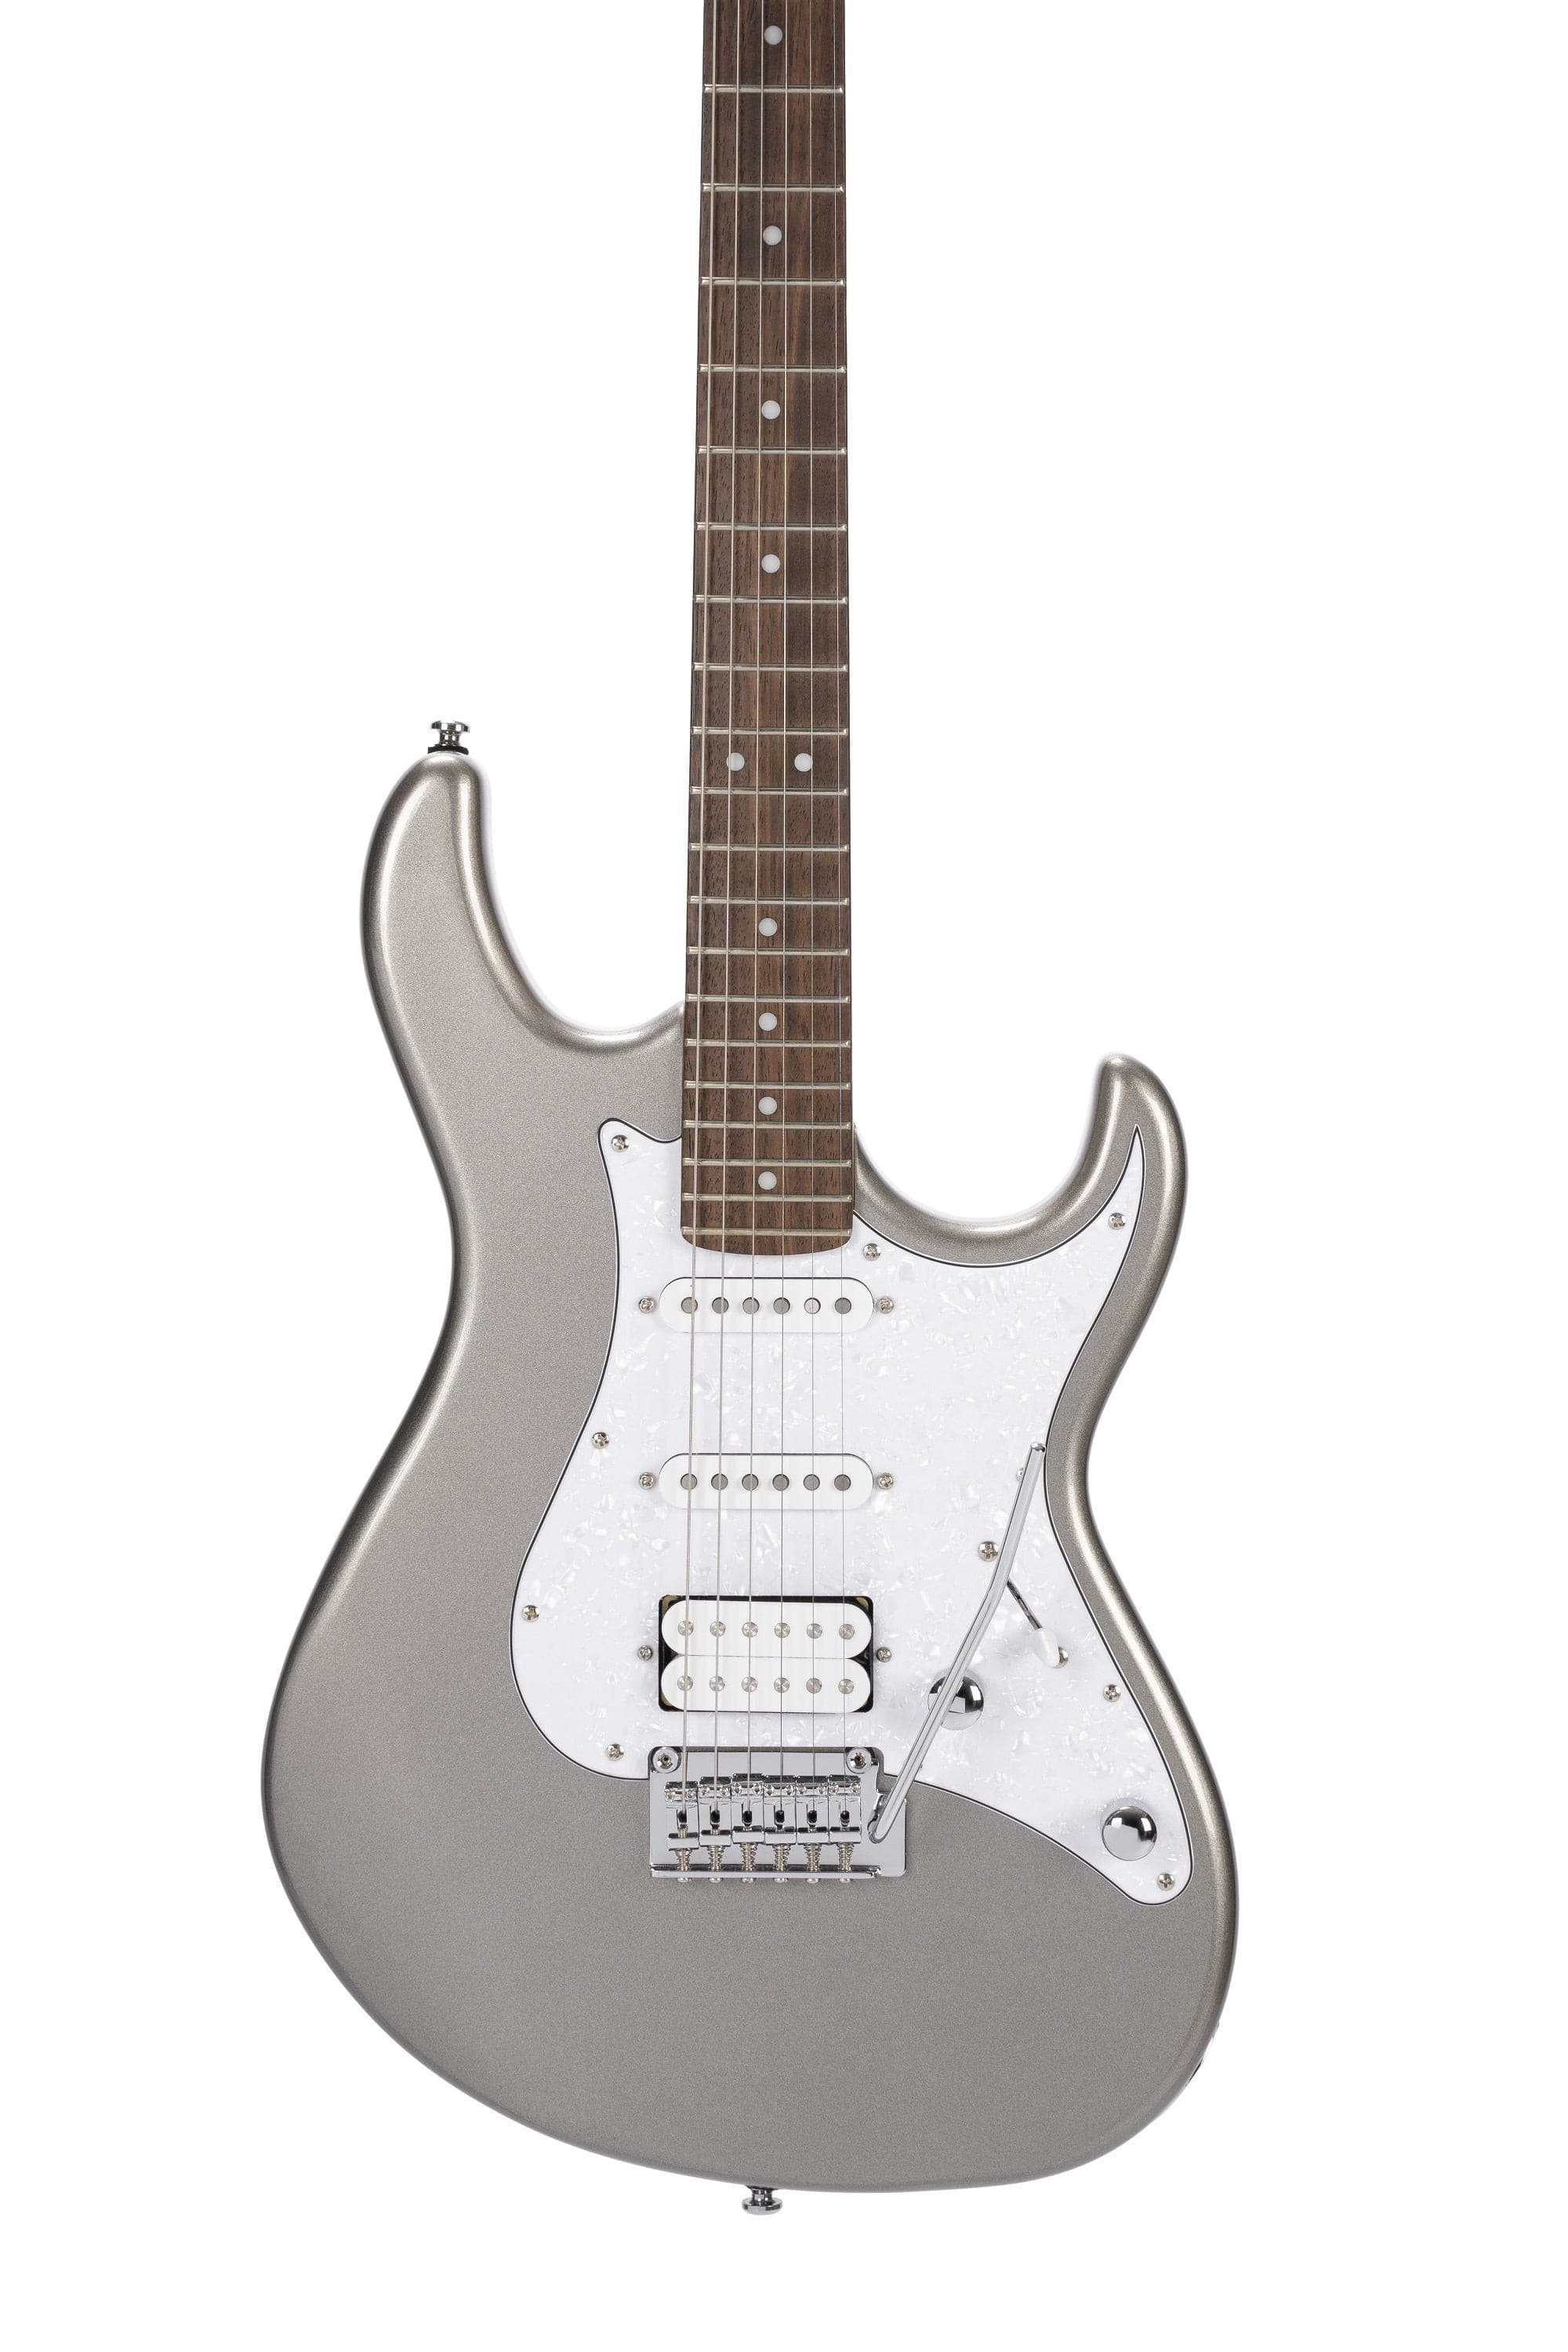 Cort G250 Silver Metallic, Electric Guitar for sale at Richards Guitars.